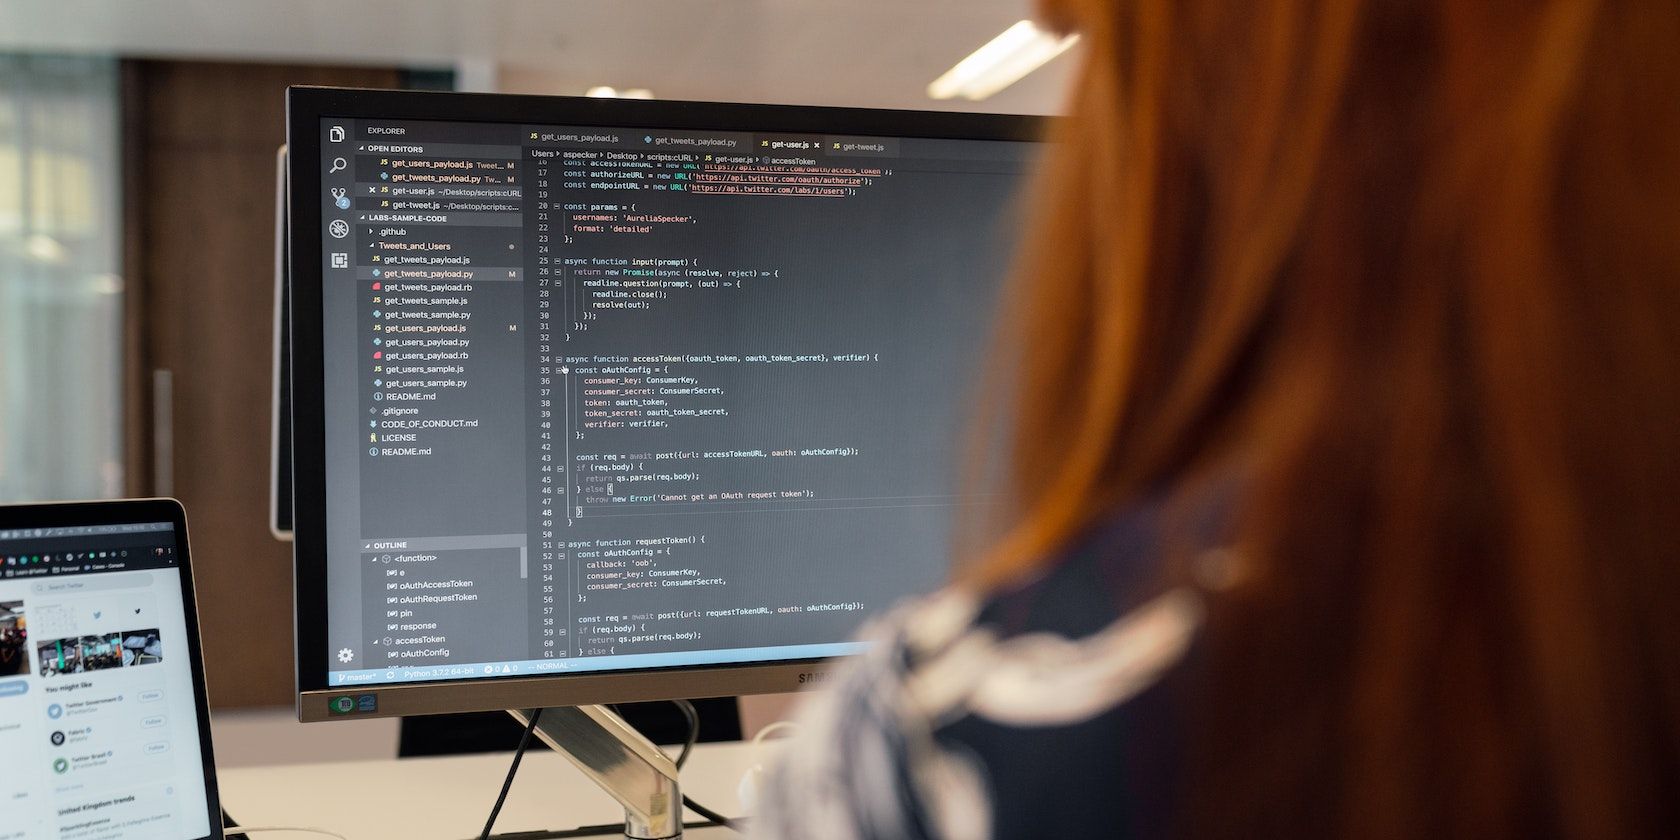 The Top 10 Tech Jobs That Require Coding and Programming